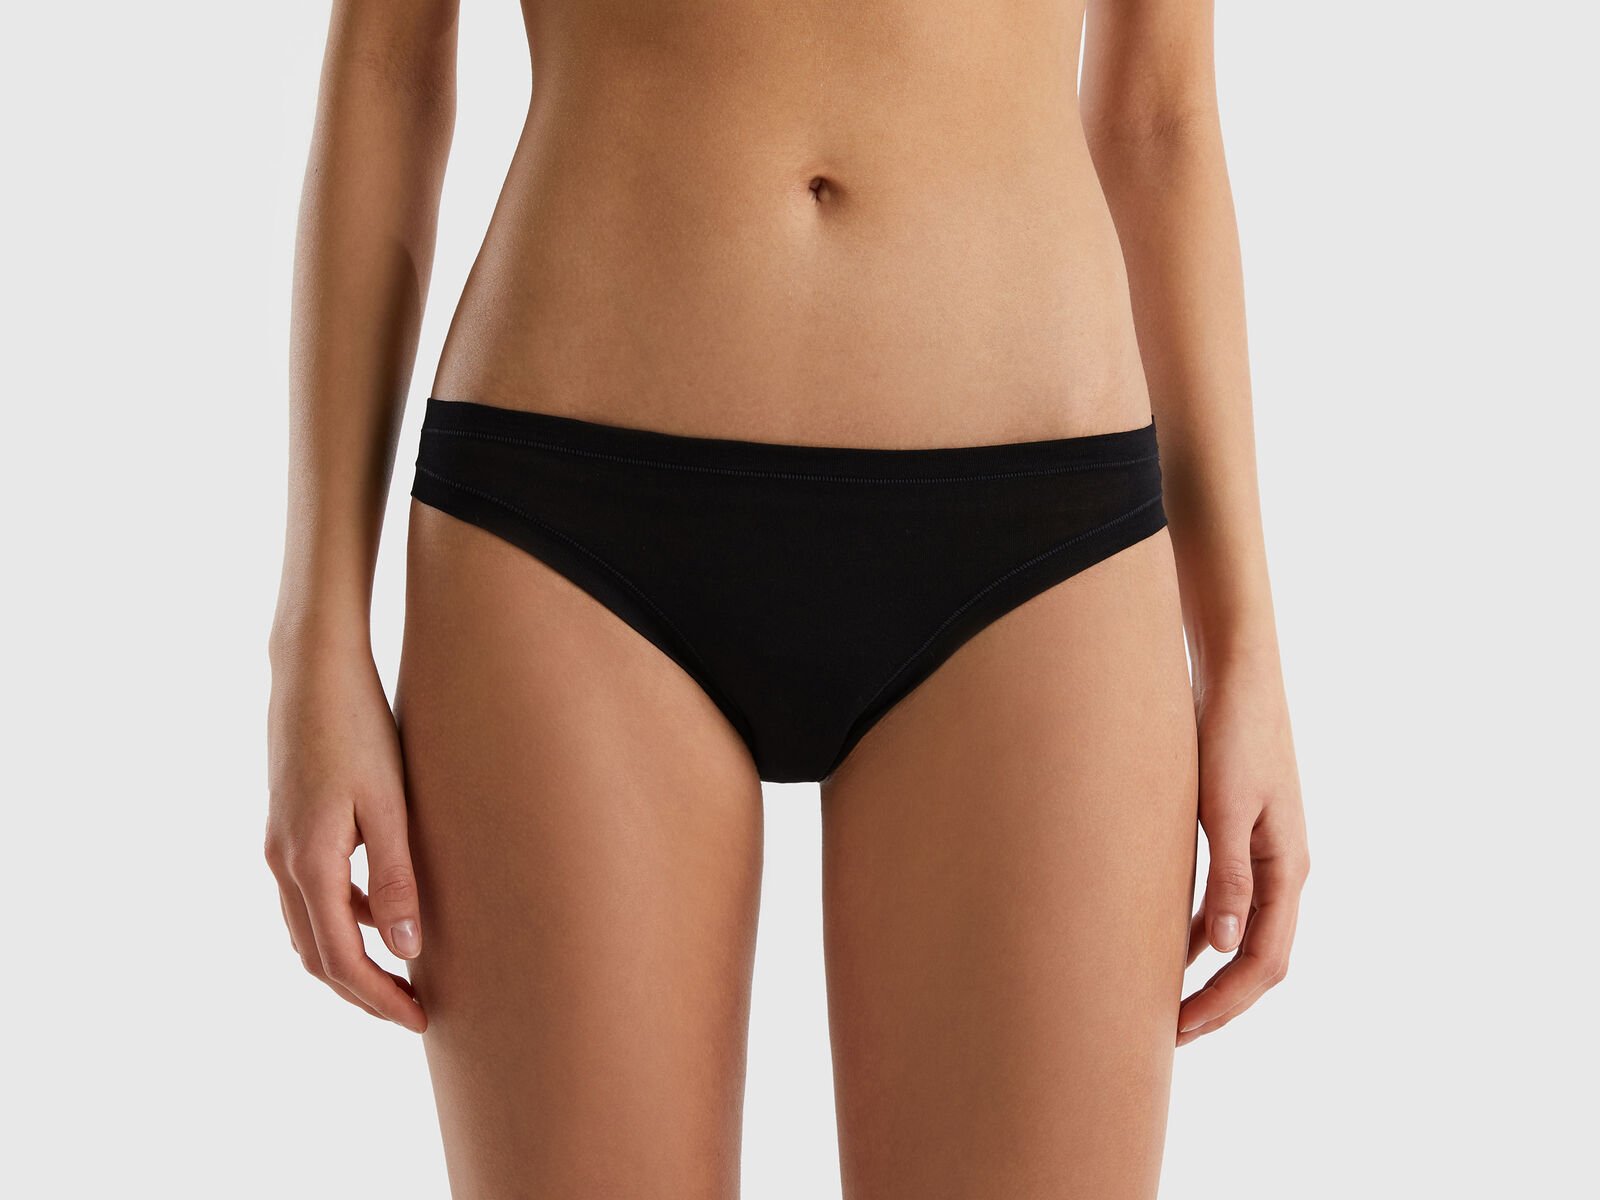 Low rise cotton brief with wide contrast outer elastic waistband